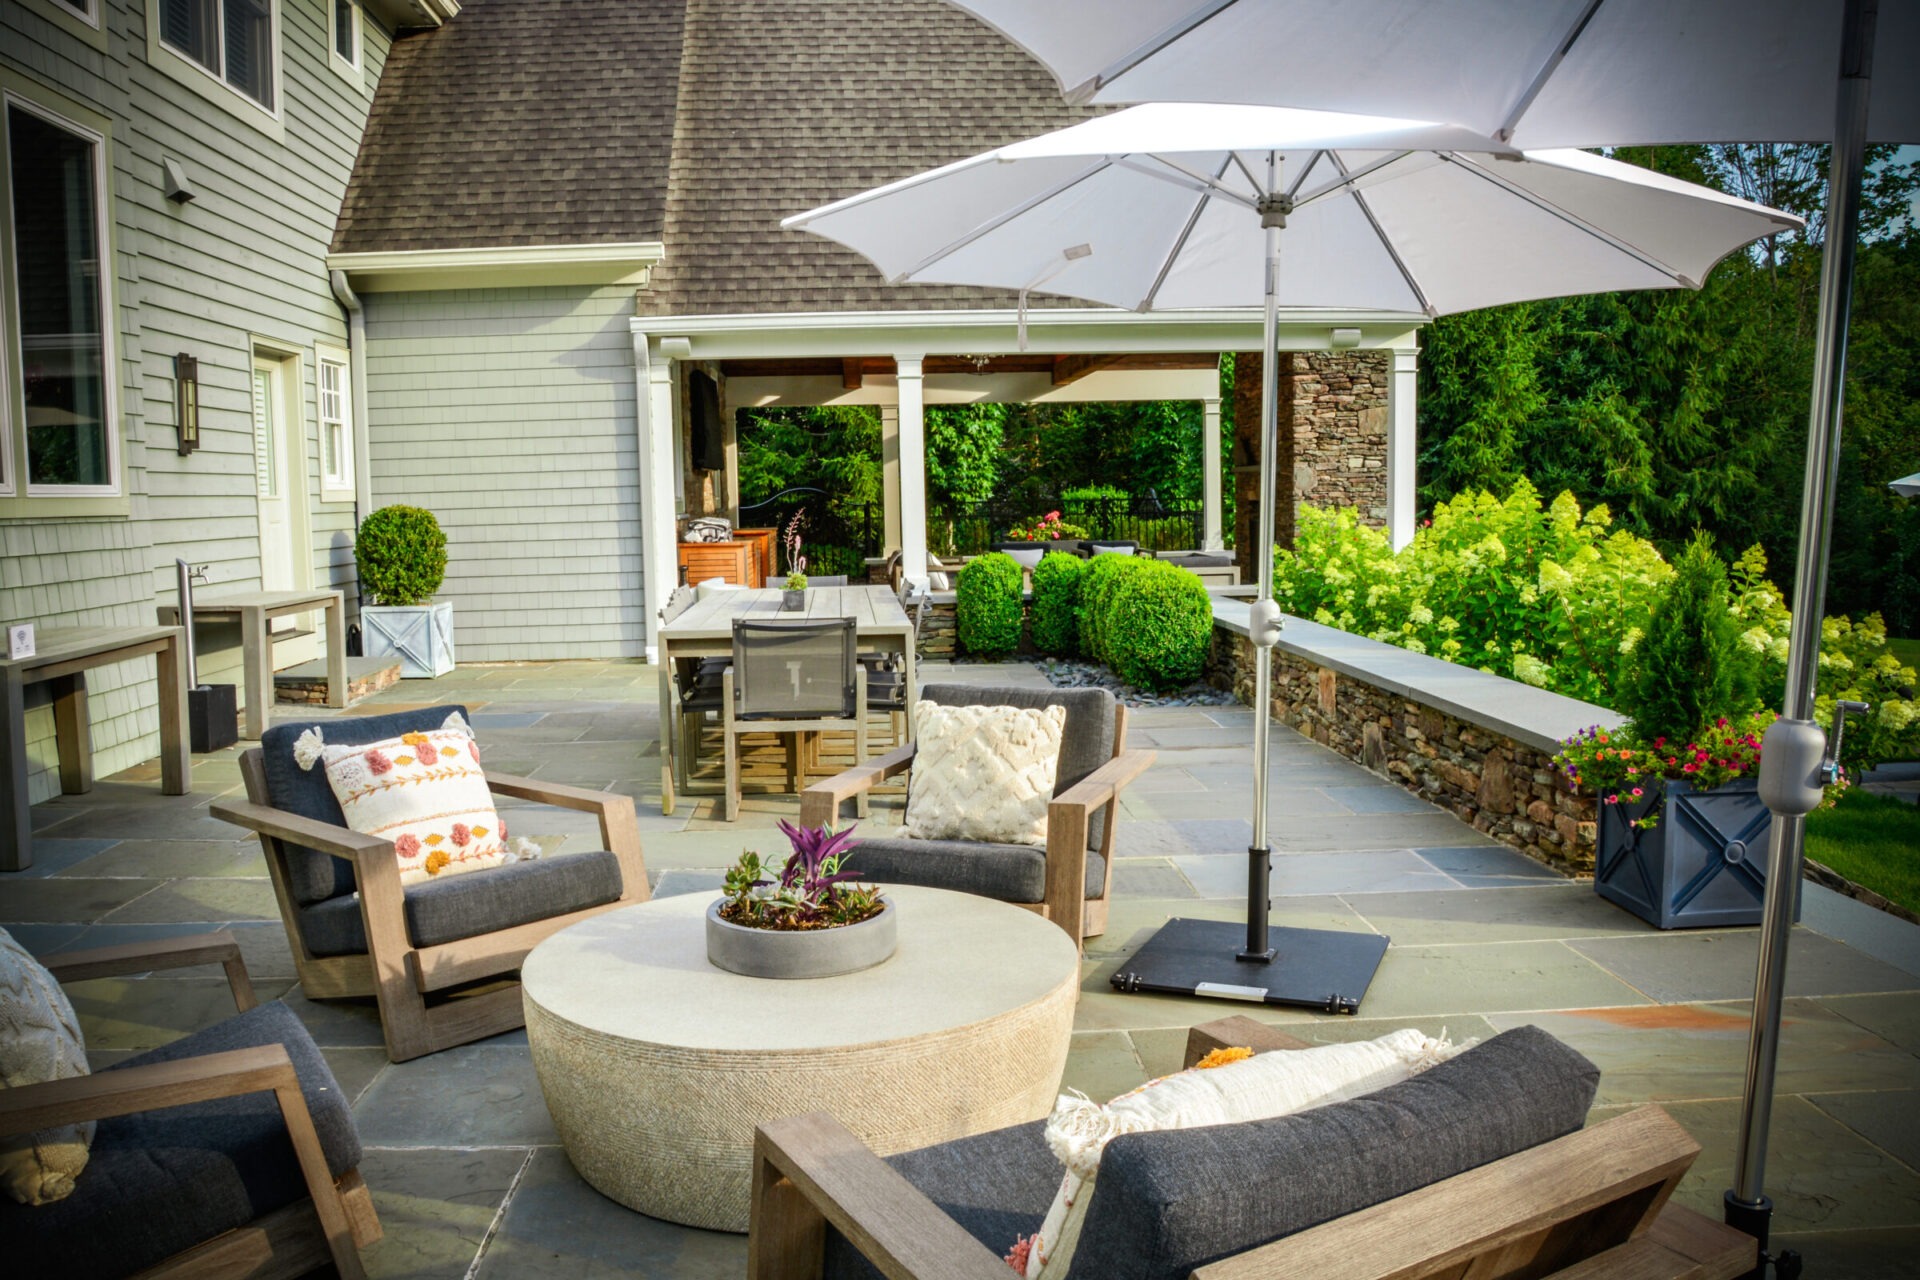 An elegant outdoor patio with comfortable seating, a dining area under an umbrella, lush greenery, and a serene atmosphere adjacent to a house.